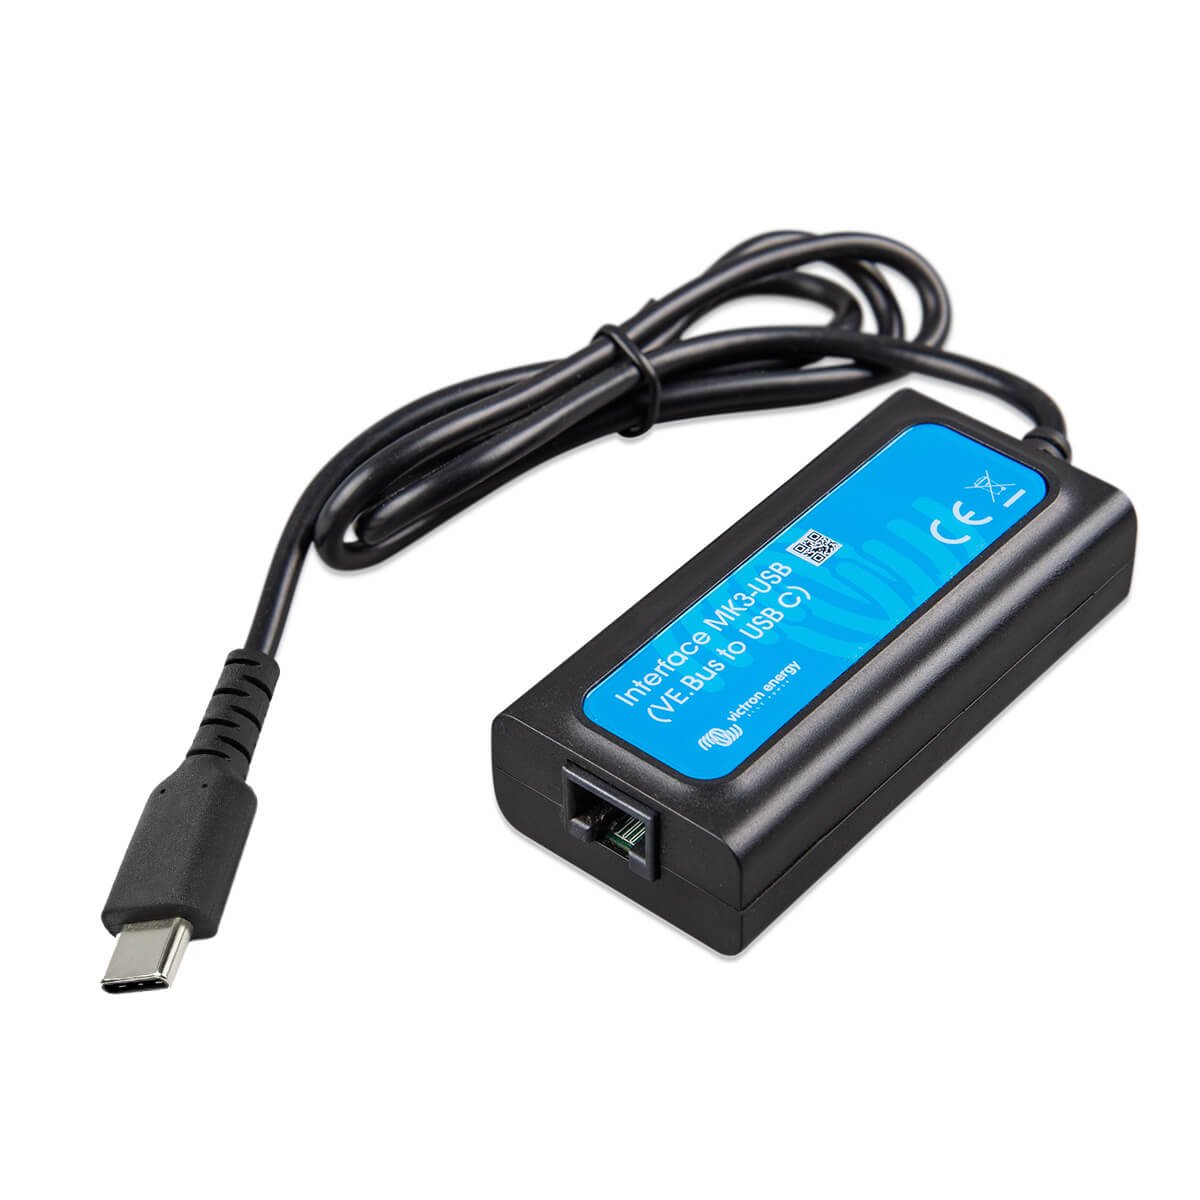 Black network adapter with USB-C connector and blue label on a white background, featuring Victron Energy Interface MK3-USB-C (VE.Bus to USB-C) for seamless VE.Bus to USB-C connectivity.